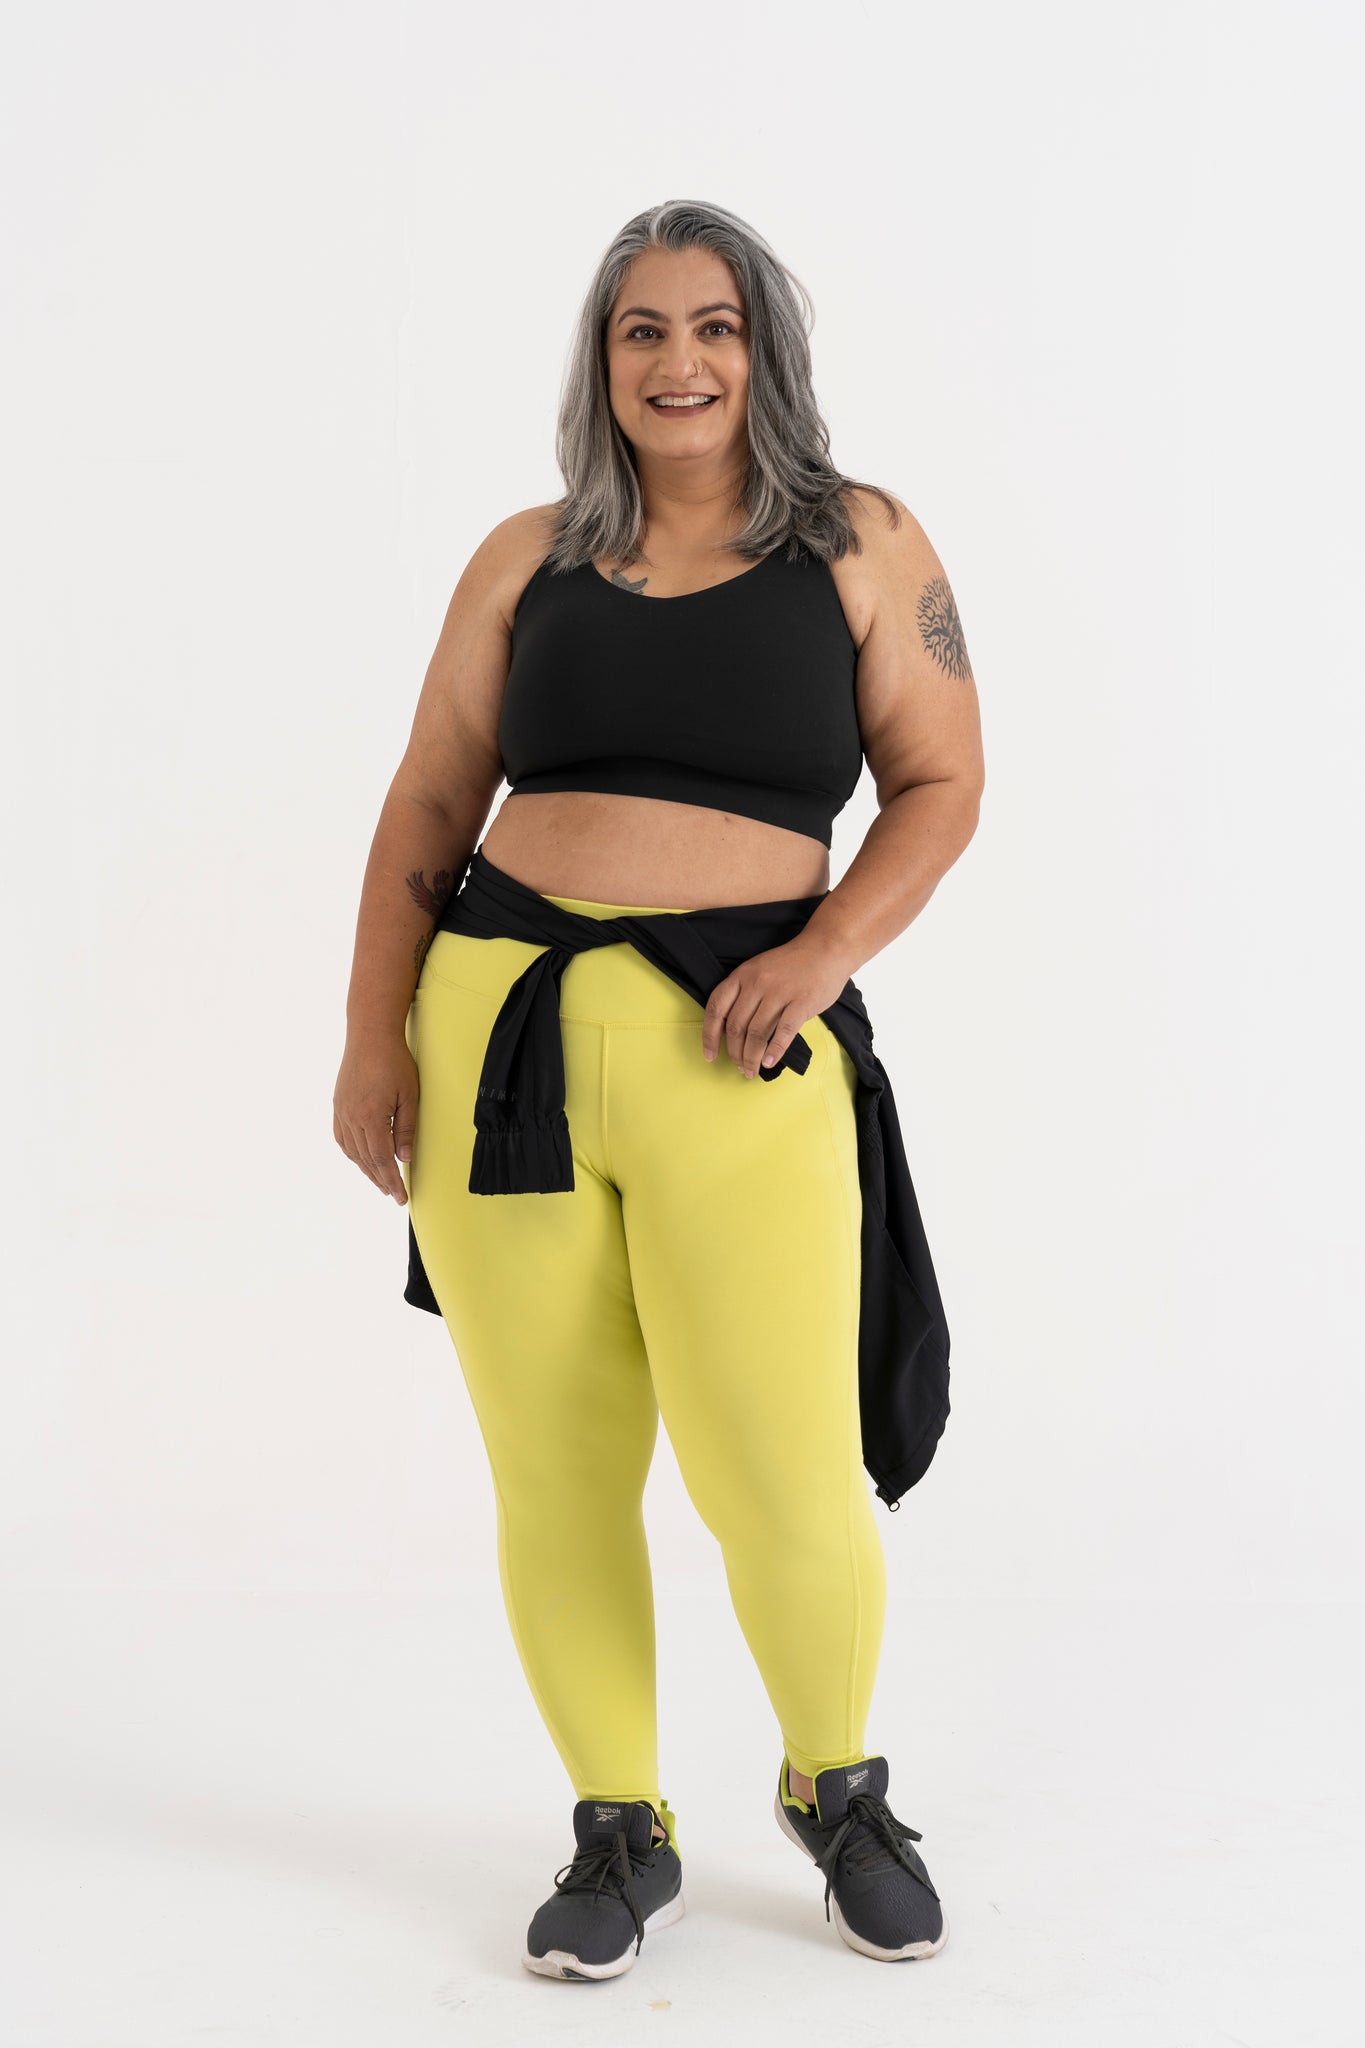 Buy WoMenLi Plus Size Women Cotton Lycra Yellow and Black Churidar Pack of  2 Leggings (Small) at Amazon.in